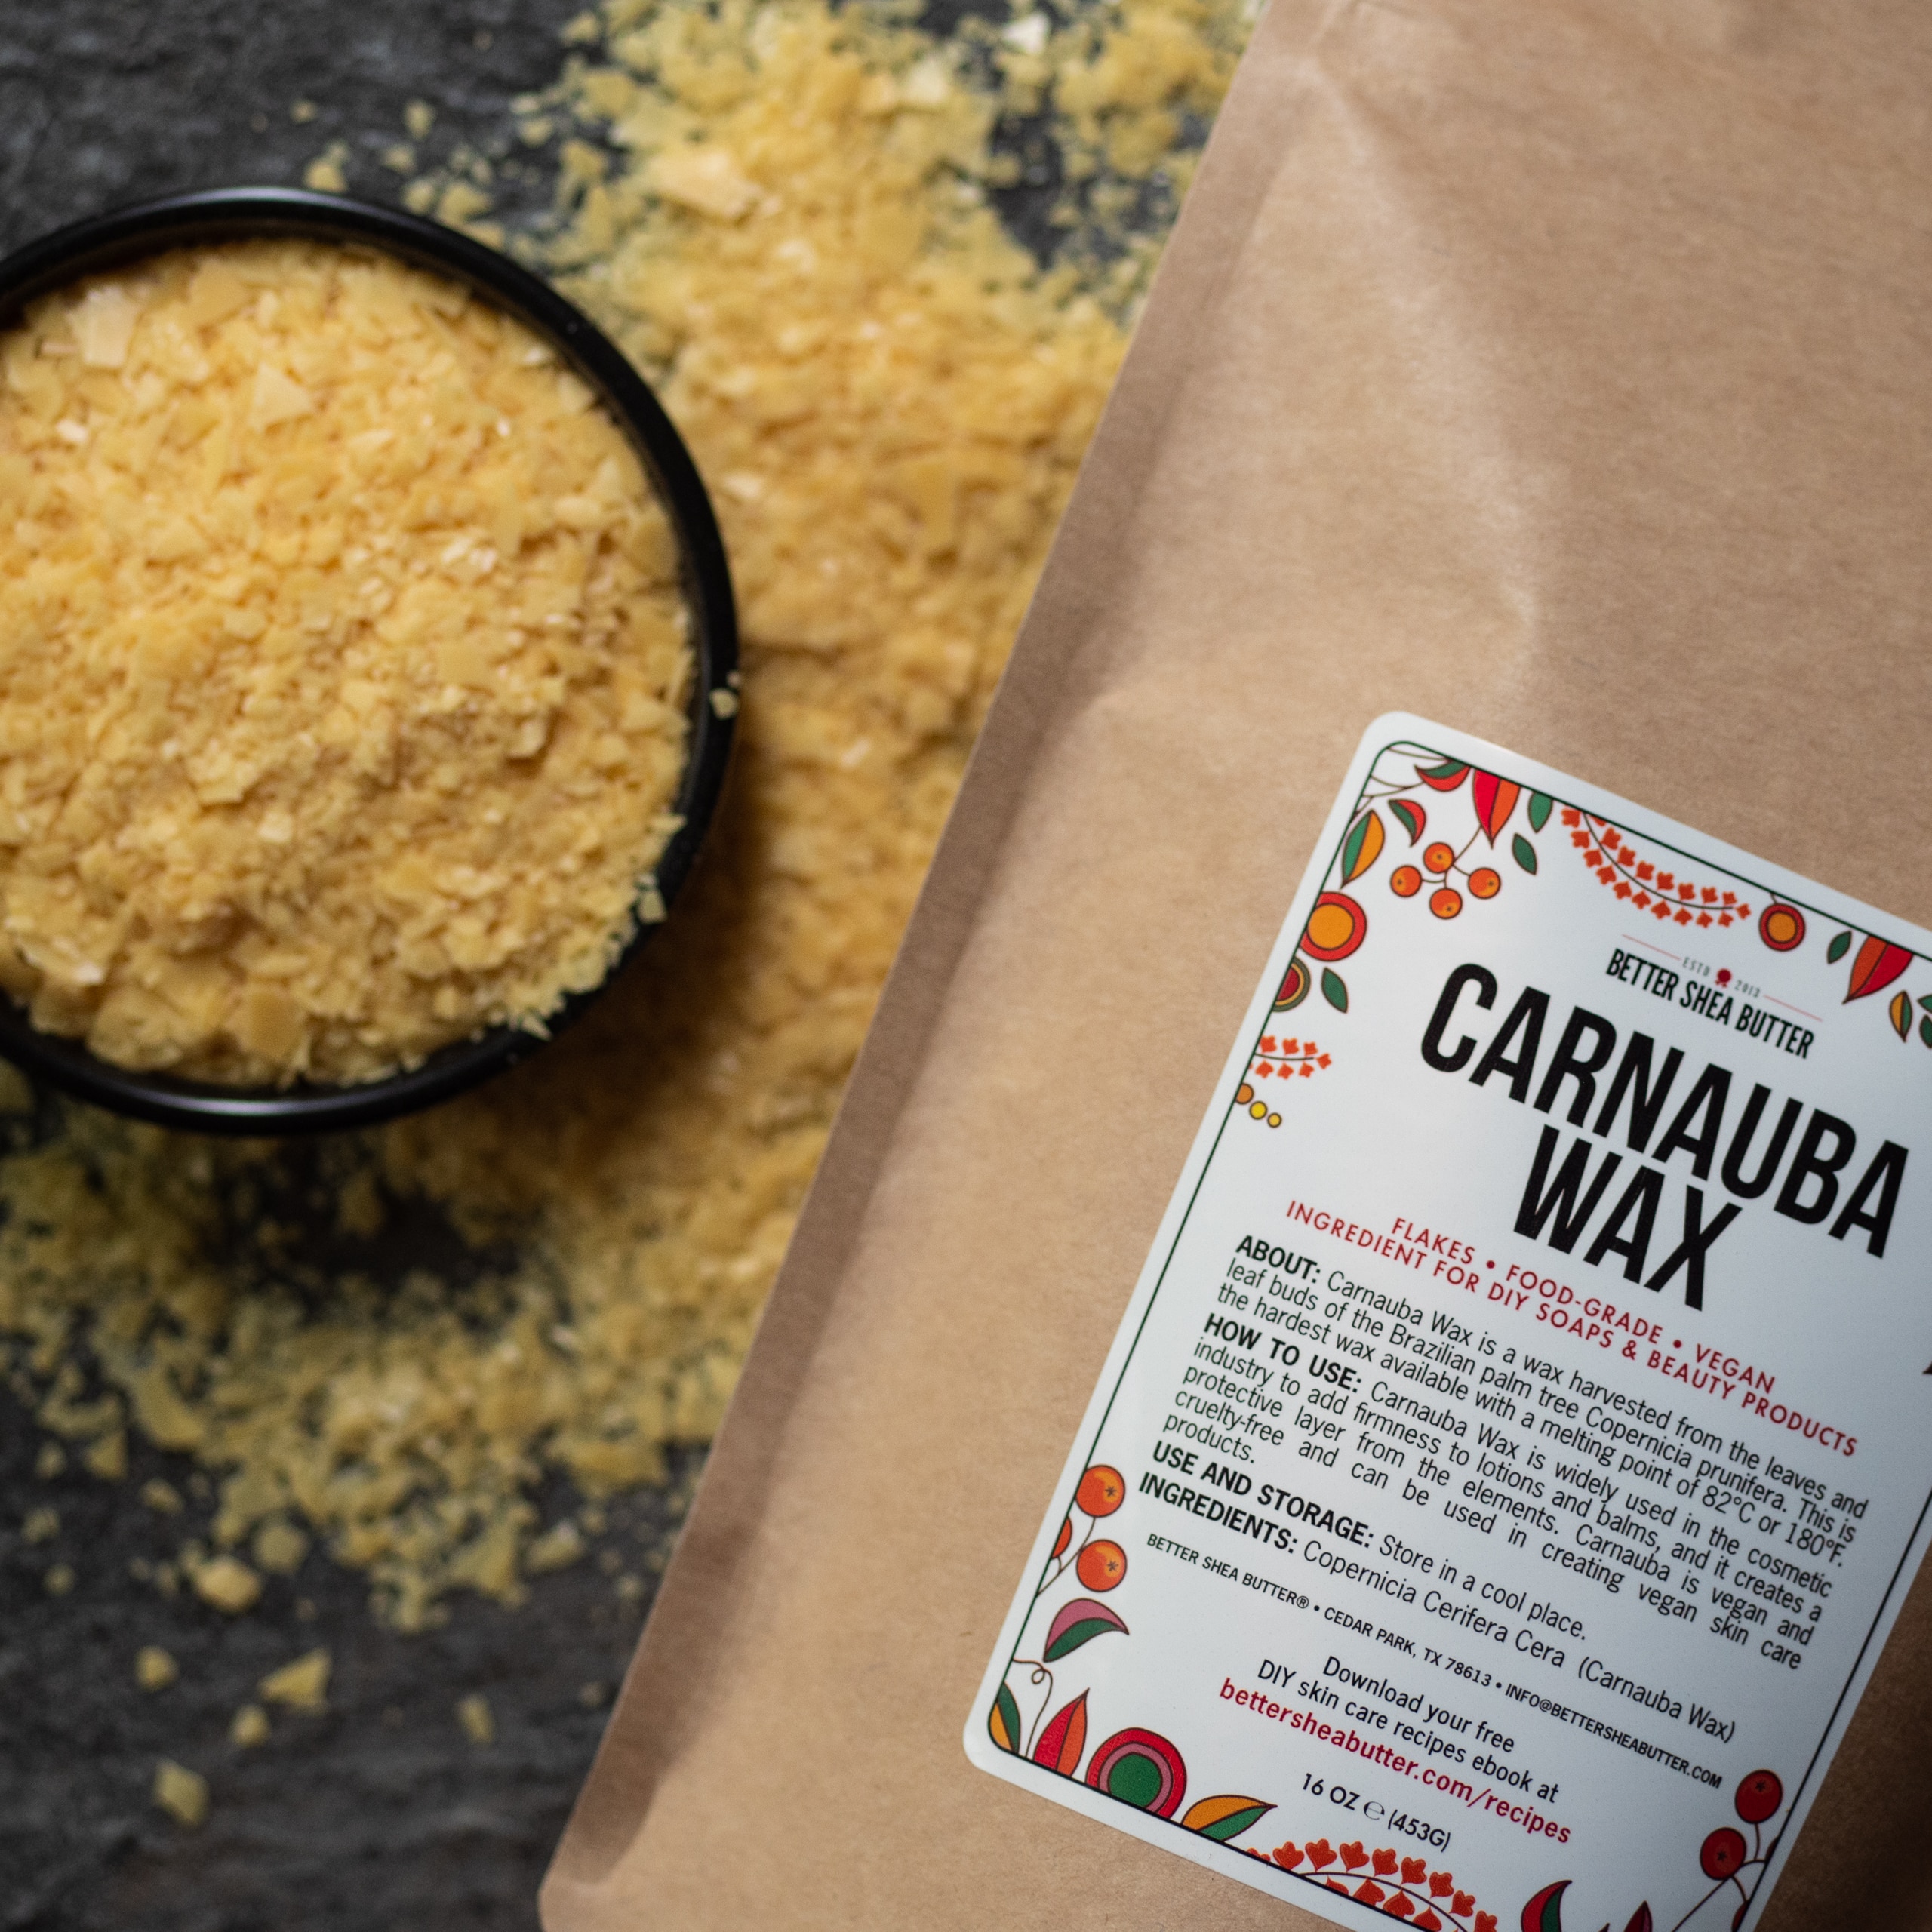 The Dangers of Carnauba Wax Explained: Stay Safe!